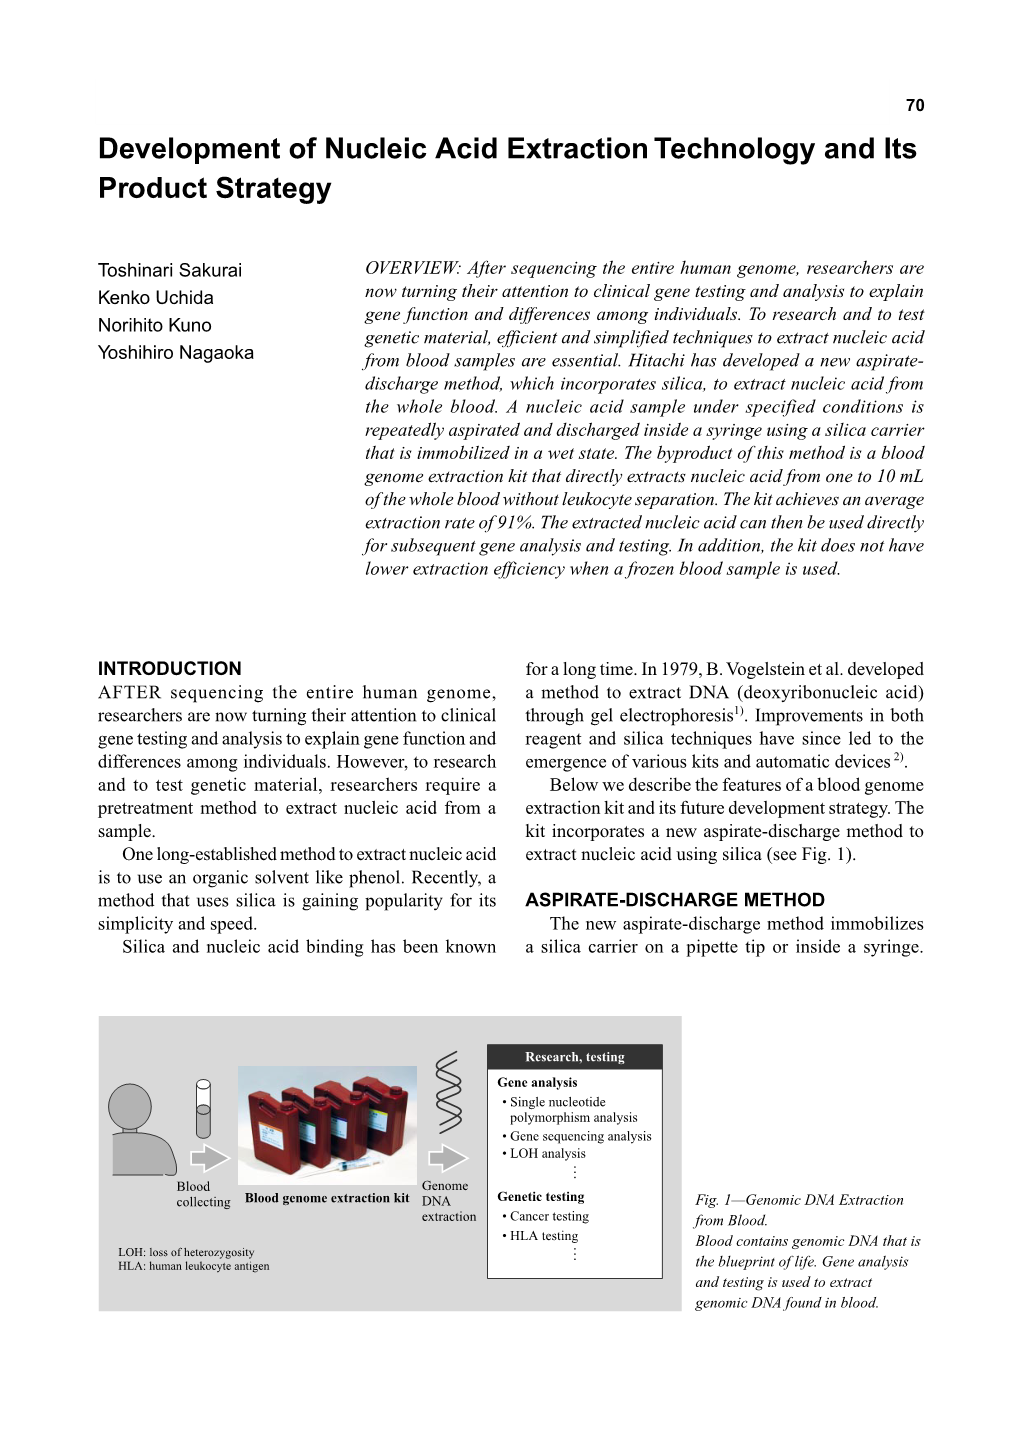 Development of Nucleic Acid Extraction Technology and Its Product Strategy 70 Development of Nucleic Acid Extraction Technology and Its Product Strategy